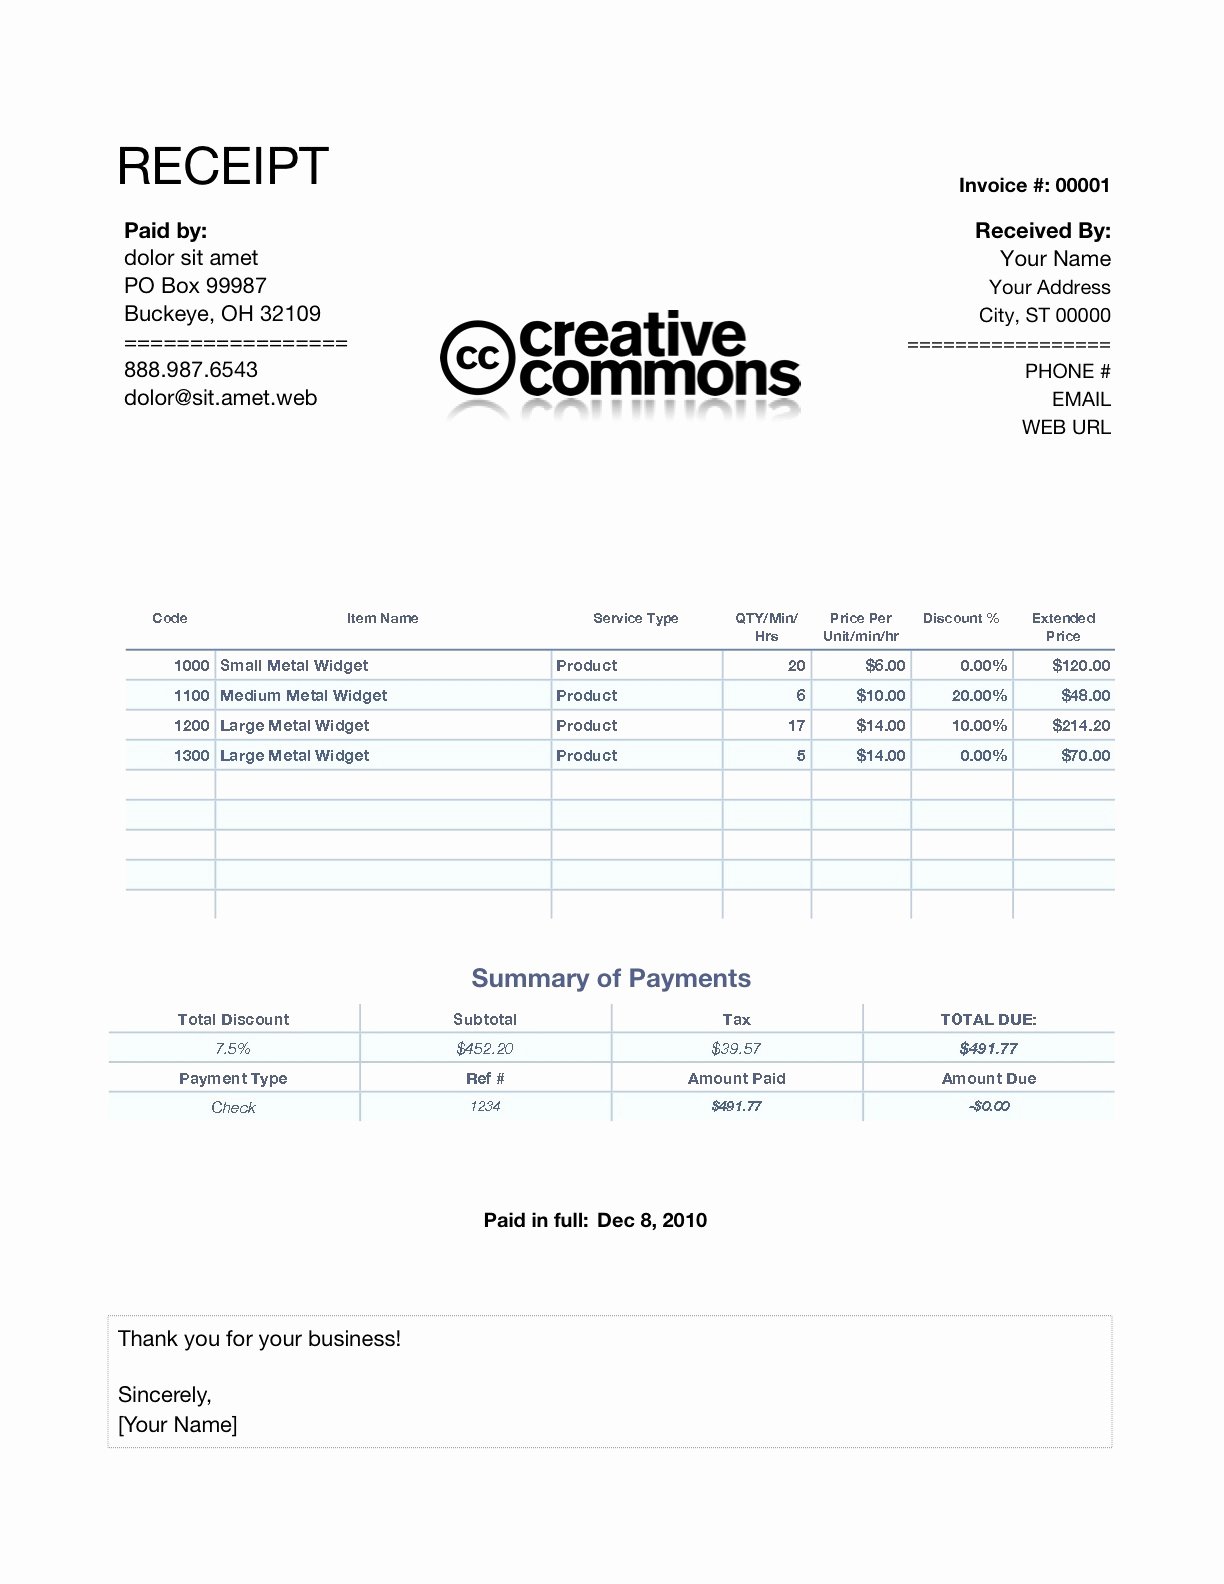 Paid Invoice Receipt Template Inspirational Receipt Invoice Invoice Template Ideas